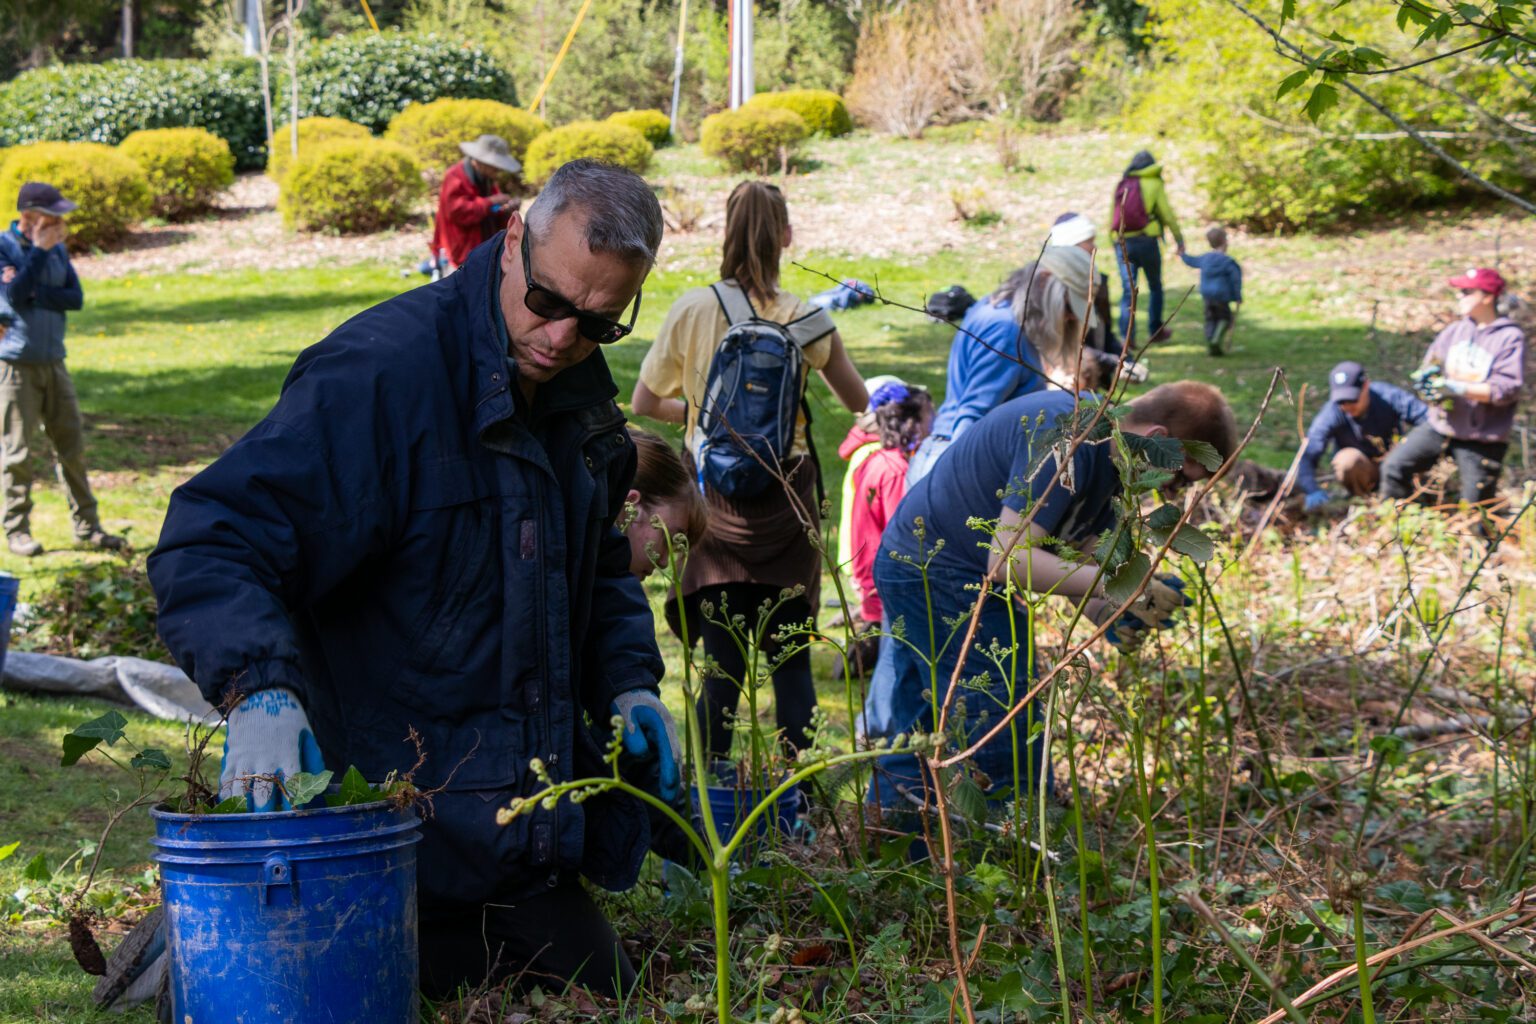 Mayor Seth Fleetwood joins volunteers to remove invasive plants around Padden Creek for an Earth Day work party in Fairhaven Park on April 23.